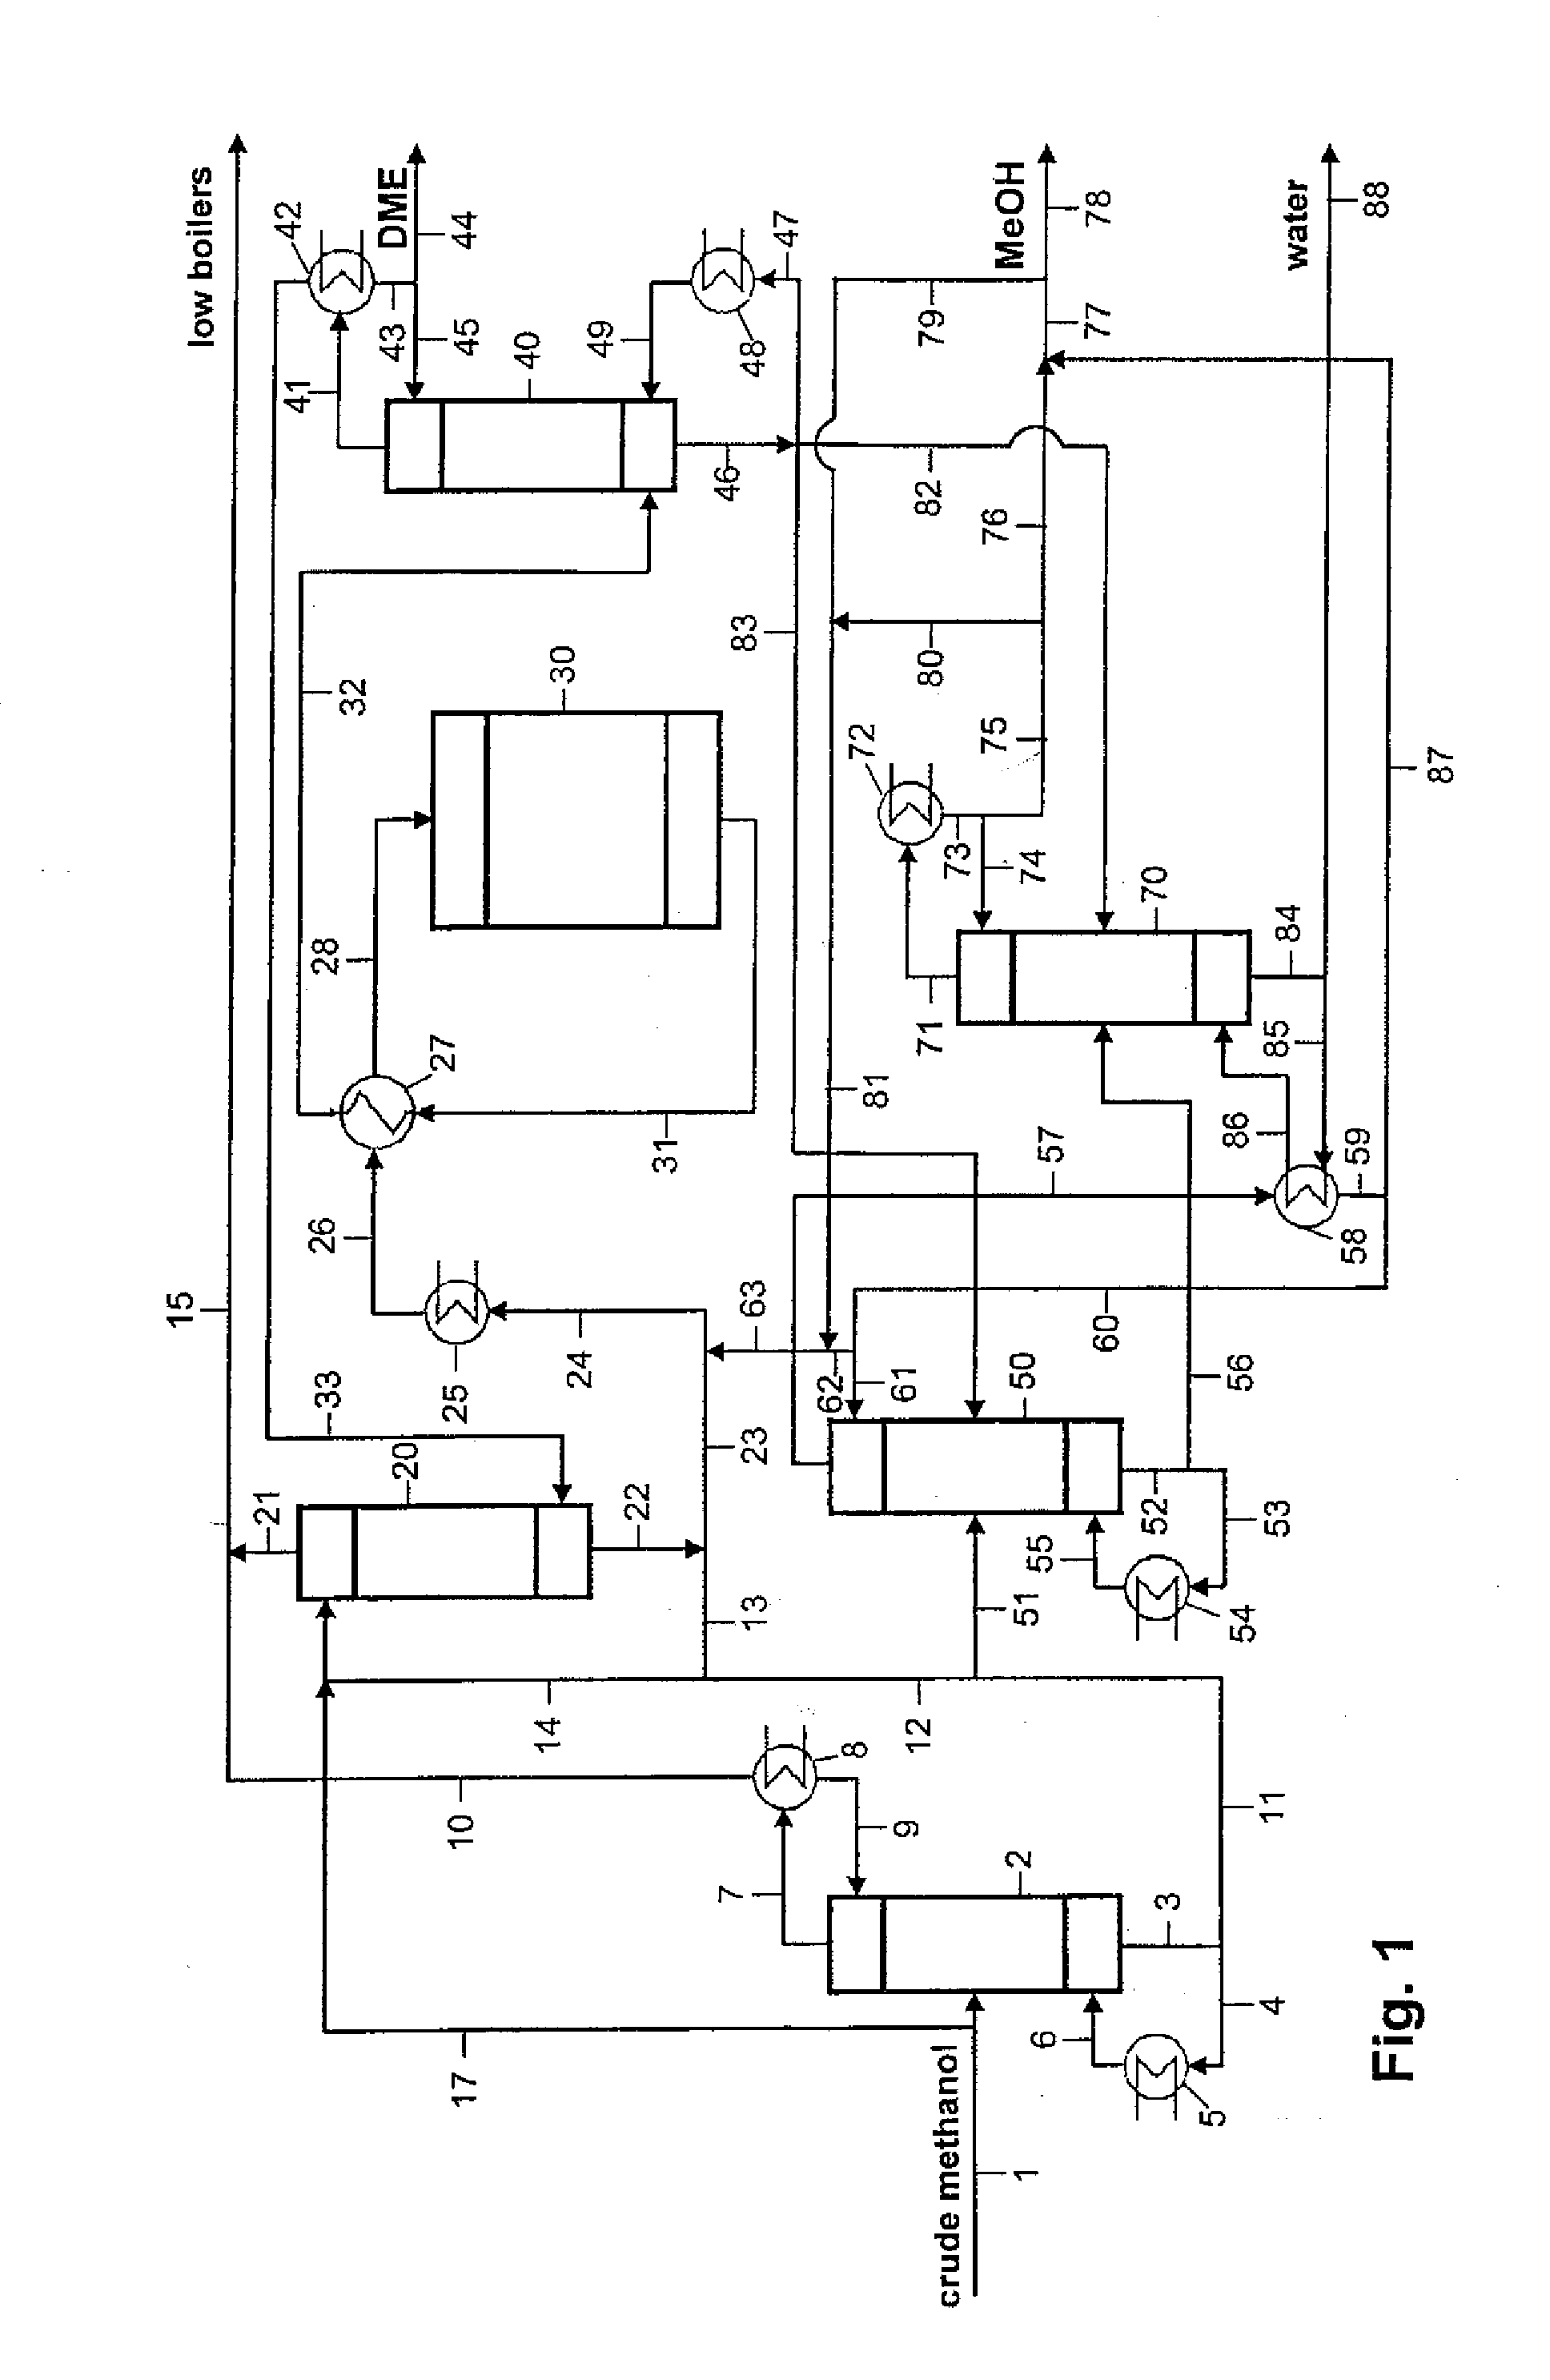 Method and system for producing methanol and dimethyl ether